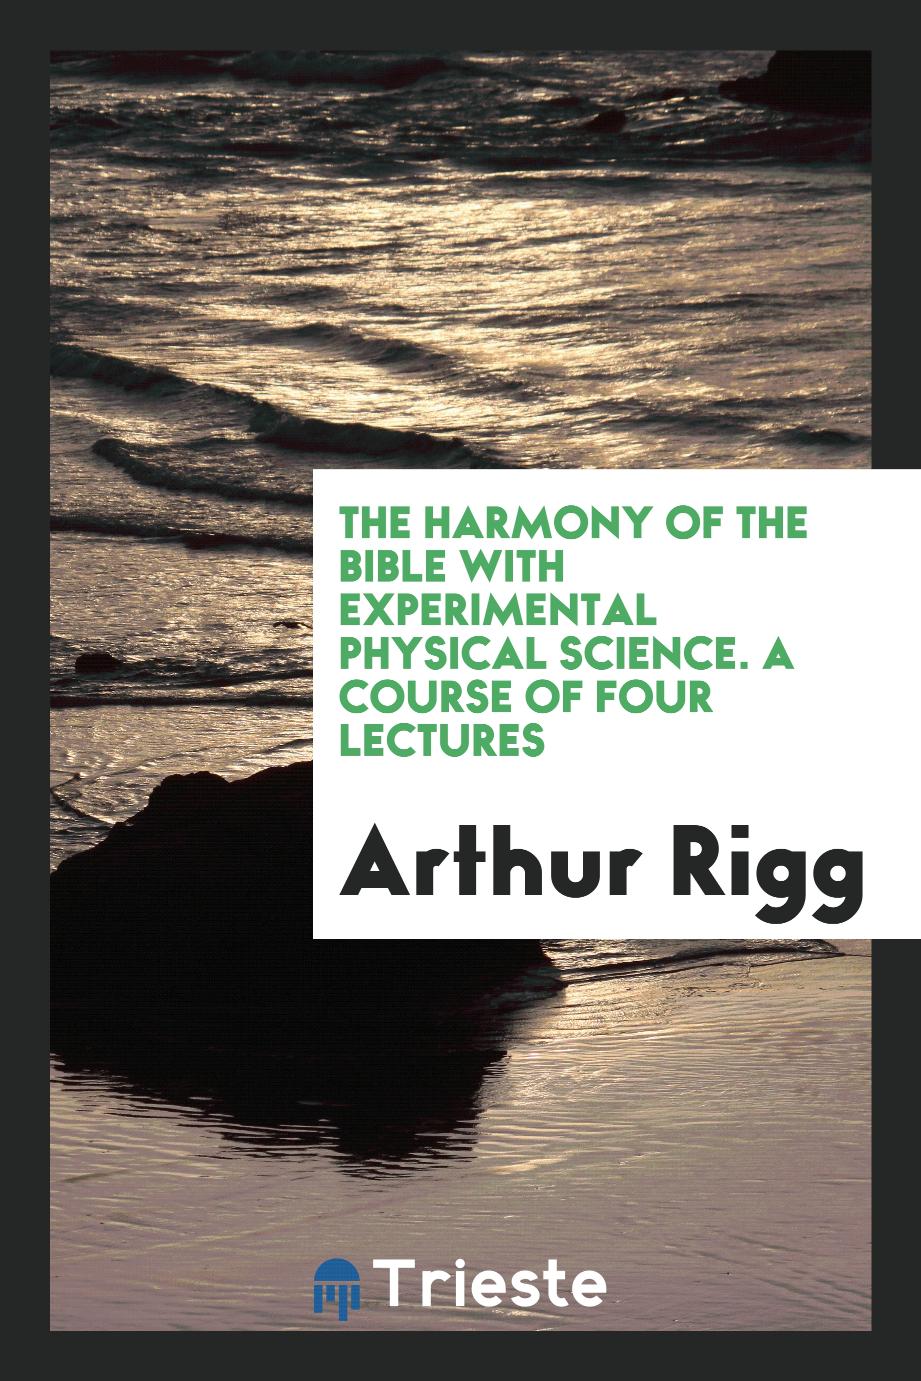 The Harmony of the Bible with Experimental Physical Science. A Course of Four Lectures